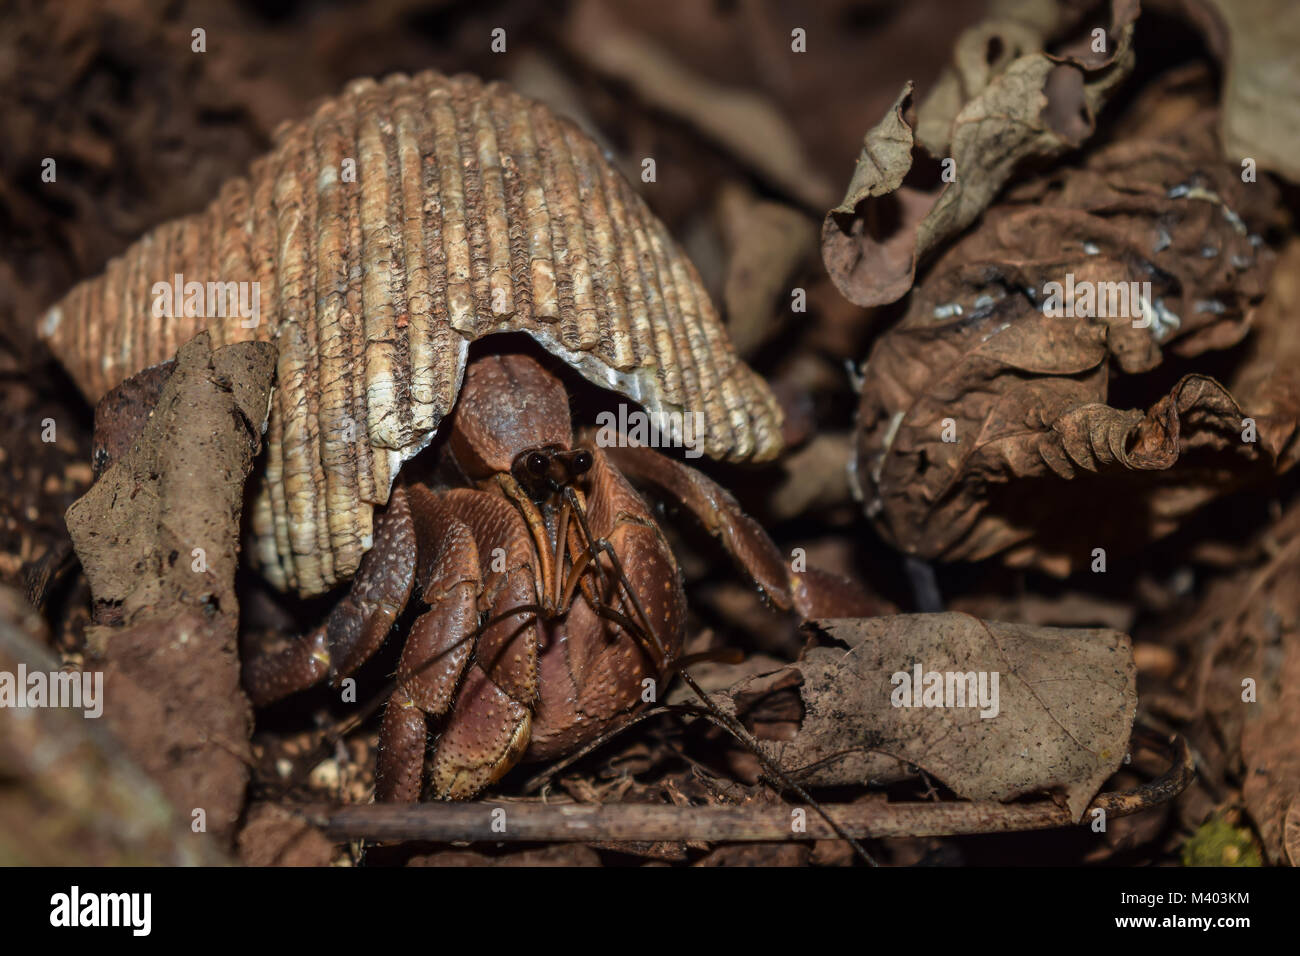 Land hermit crab camoflagued among brown leaf litter, peering out of its shell Stock Photo